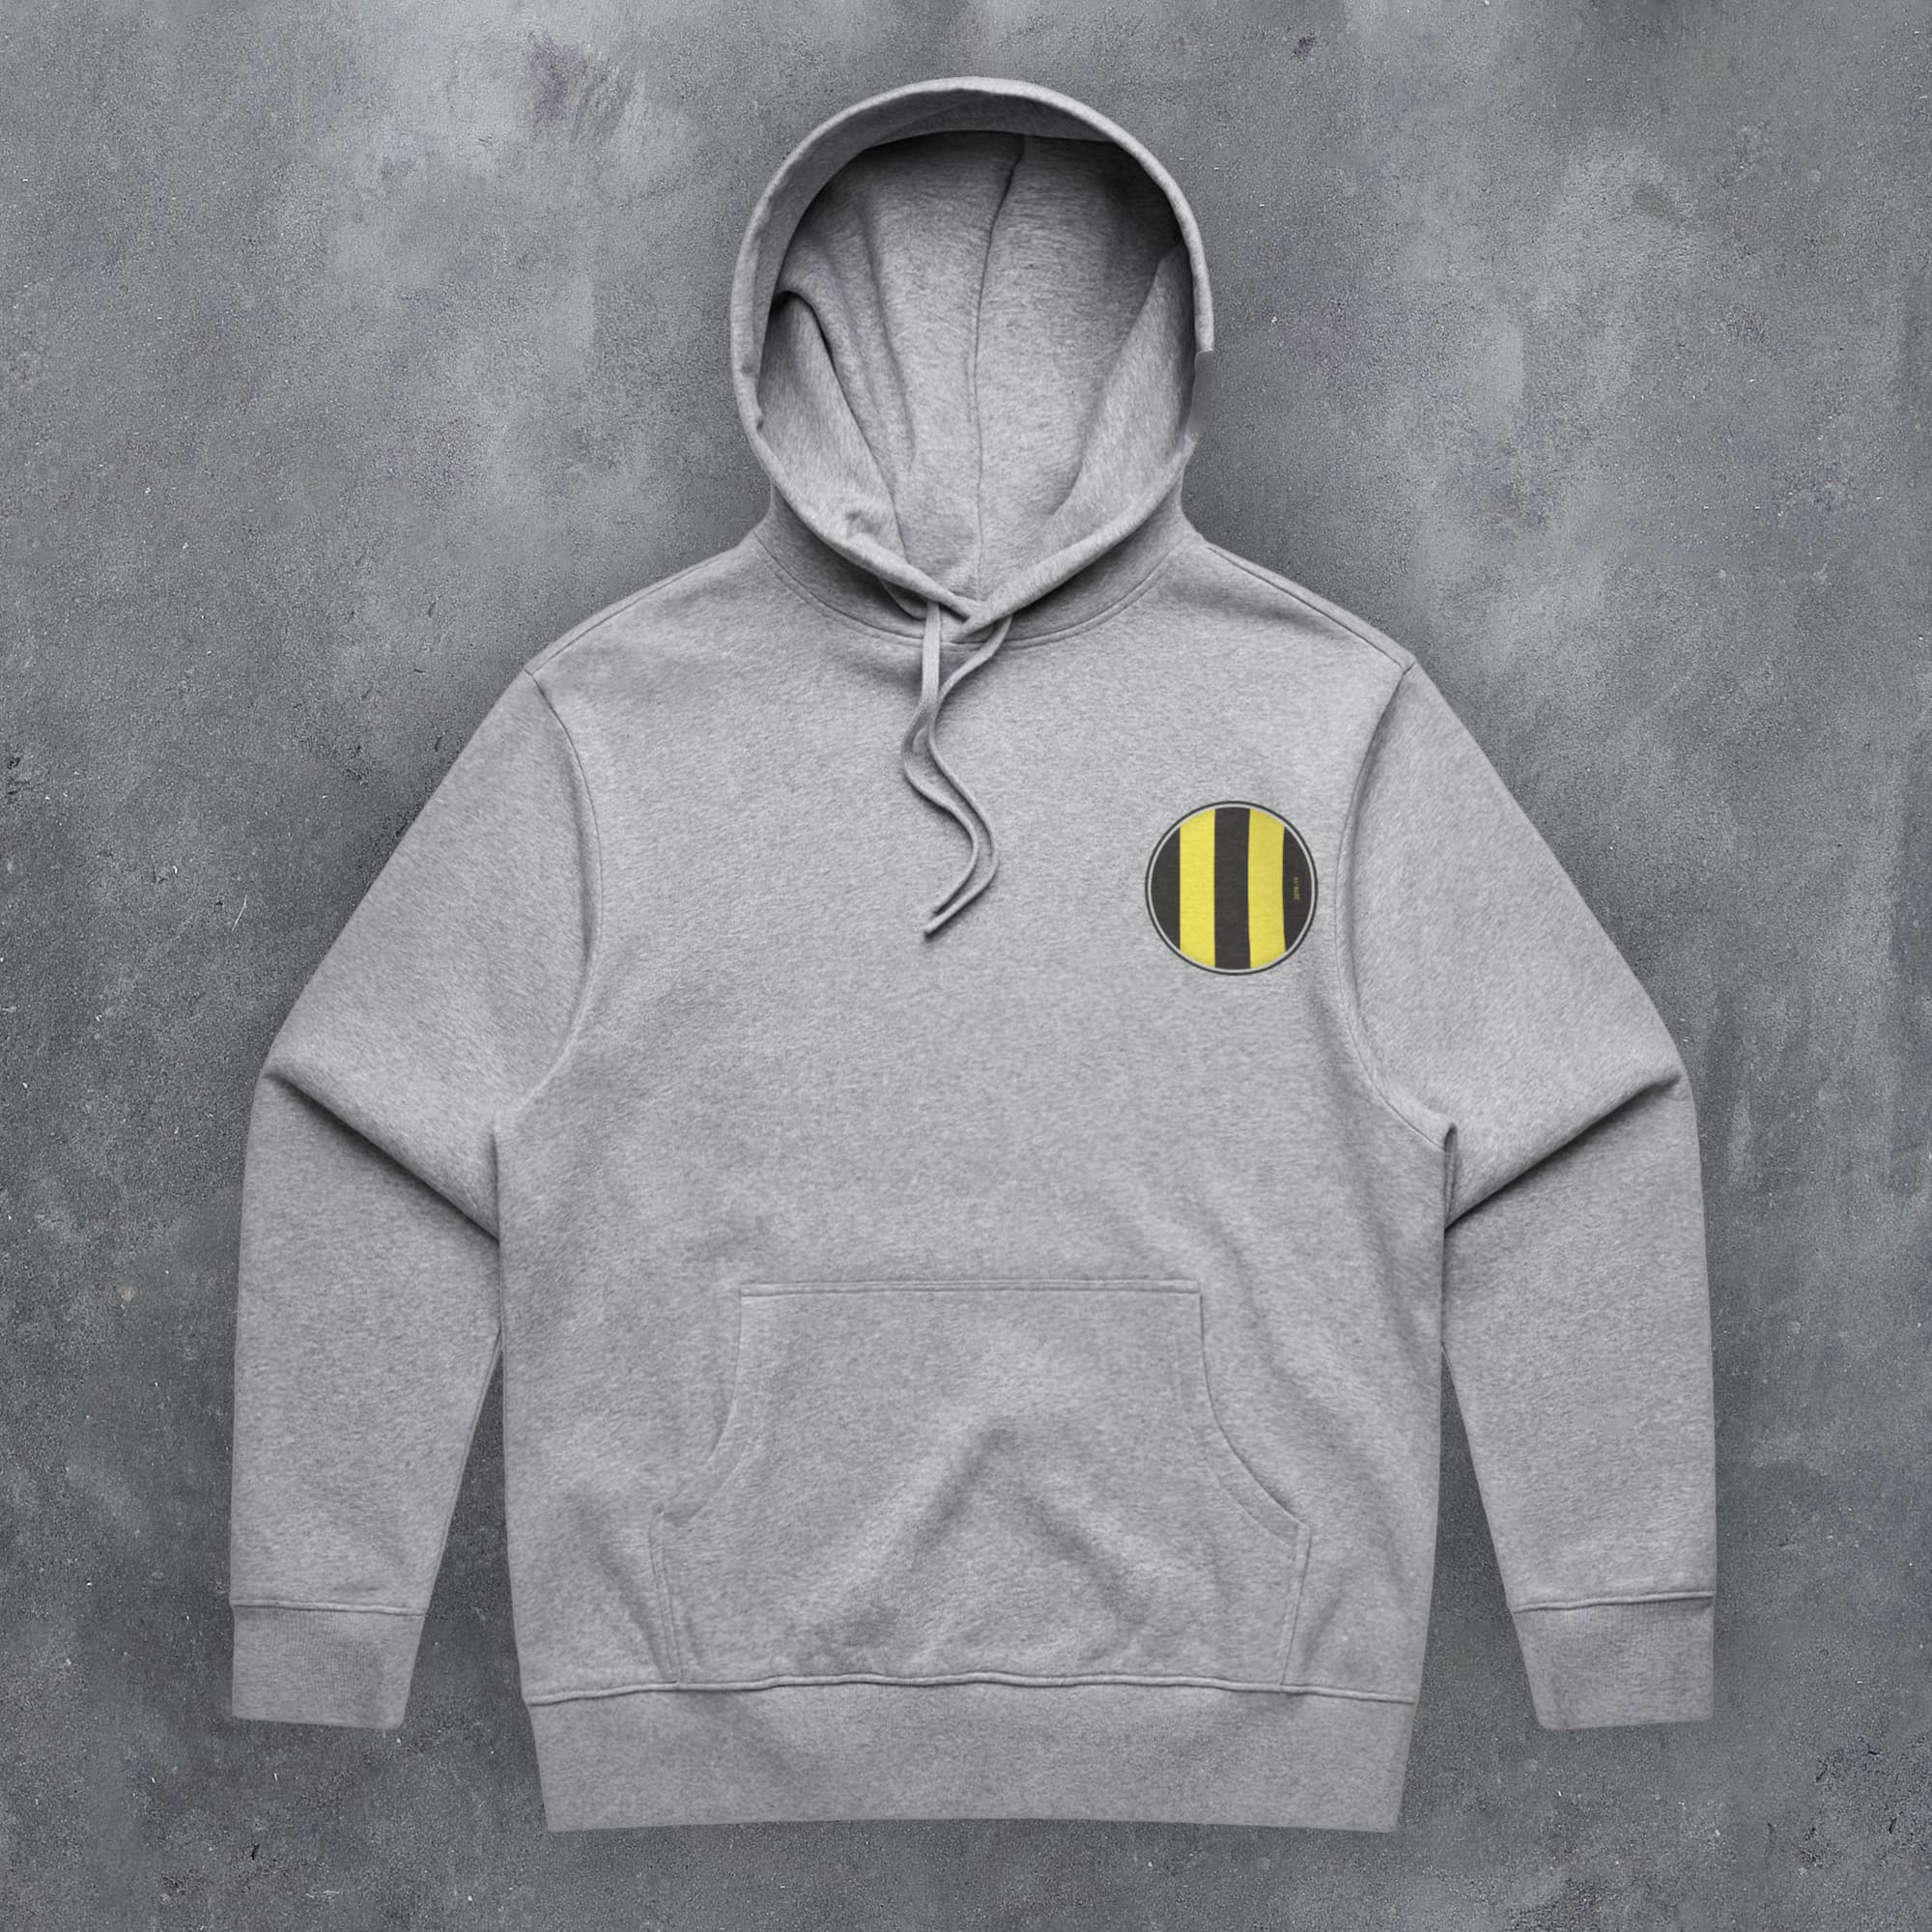 a grey hoodie with a yellow and black stripe on it